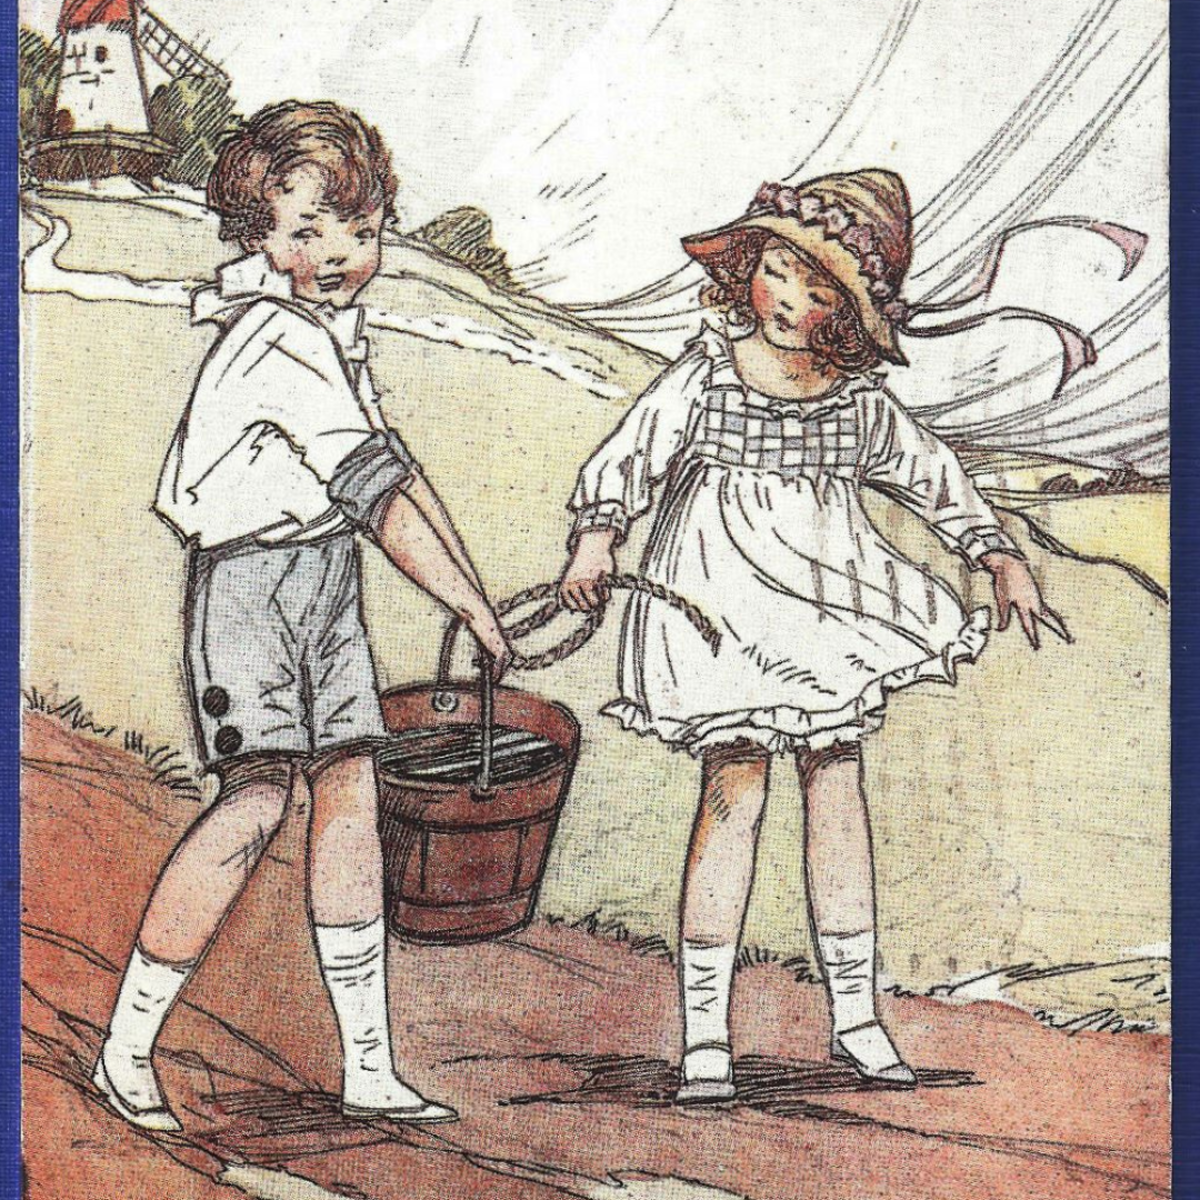 Detail of a postcard with the words and tune of "Jack and Jill," originally illustrated by Dorothy M. Wheeler in "English Nursery Rhymes" (1916)